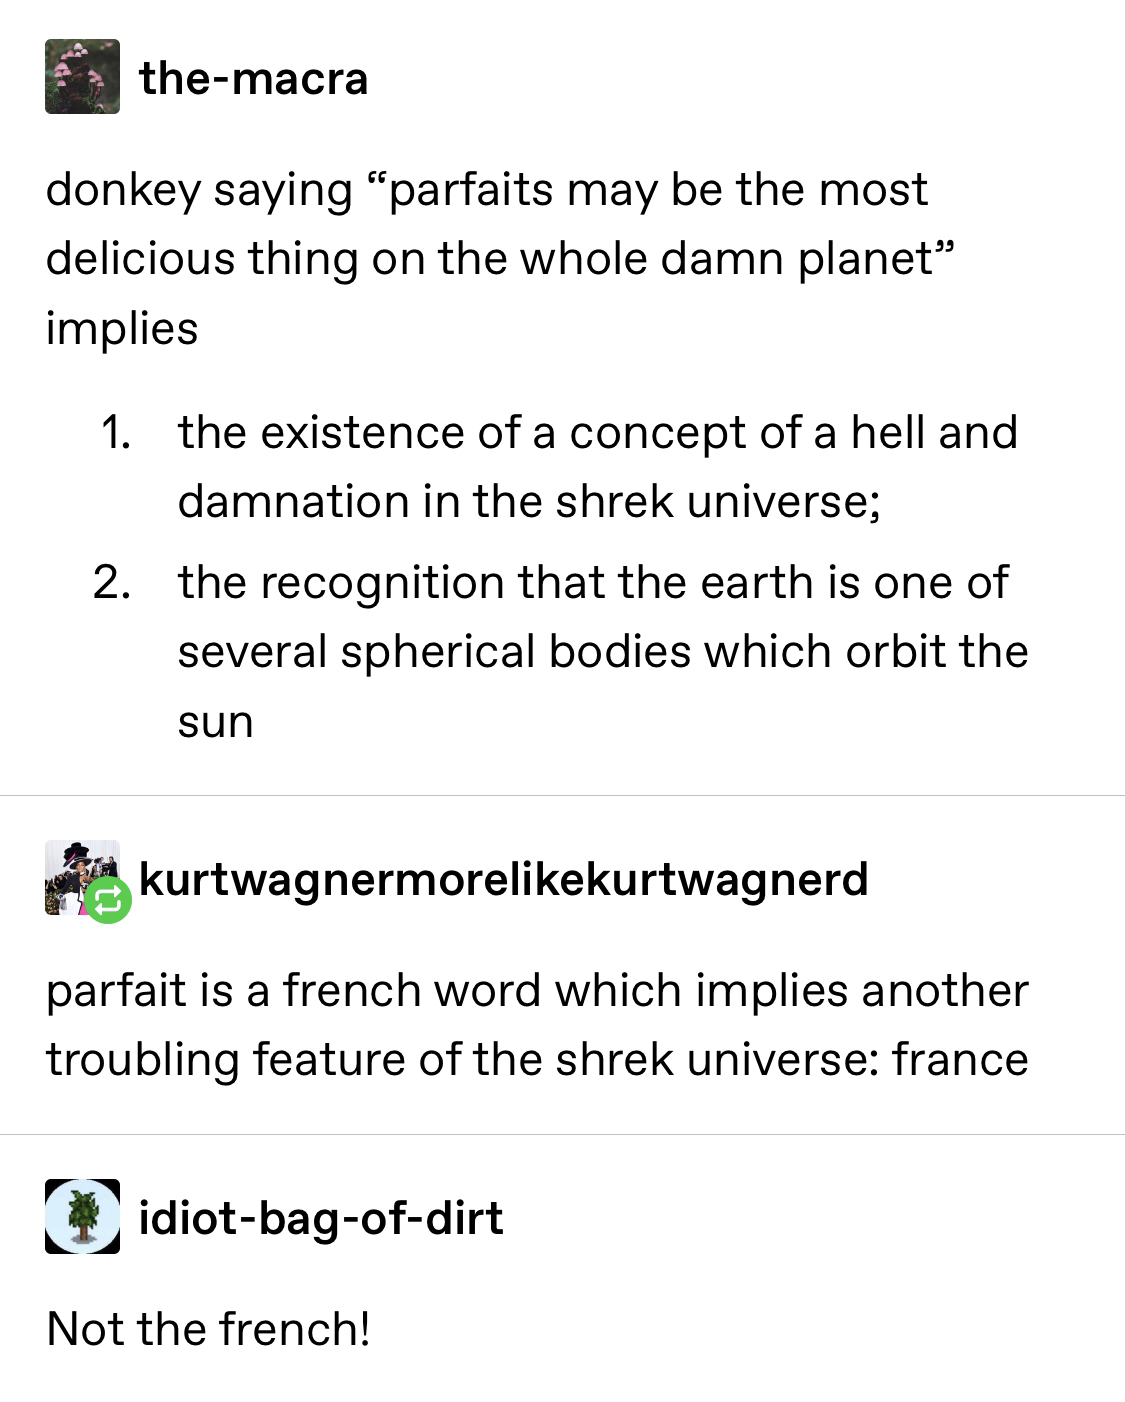 angle - themacra donkey saying parfaits may be the most delicious thing on the whole damn planet implies 1. the existence of a concept of a hell and damnation in the shrek universe; 2. the recognition that the earth is one of several spherical bodies whic